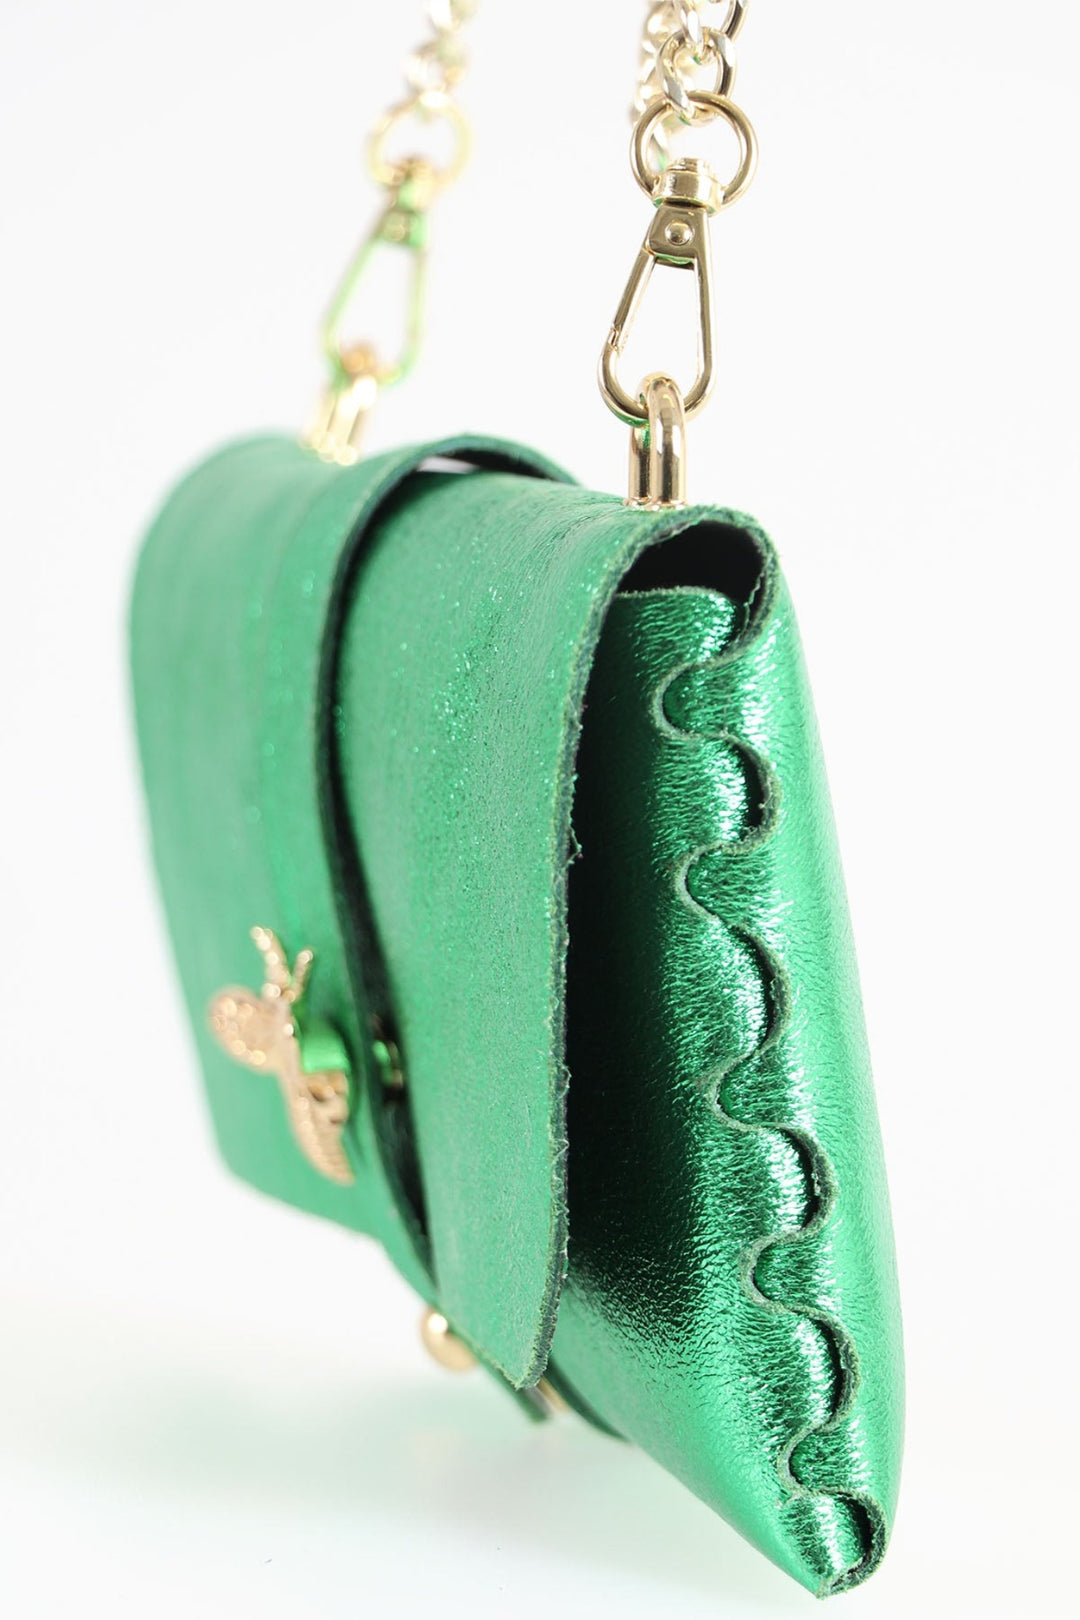 Metallic Bright Green Bee Emblem Genuine Italian Leather Clutch Bag with Gold Chain Strap